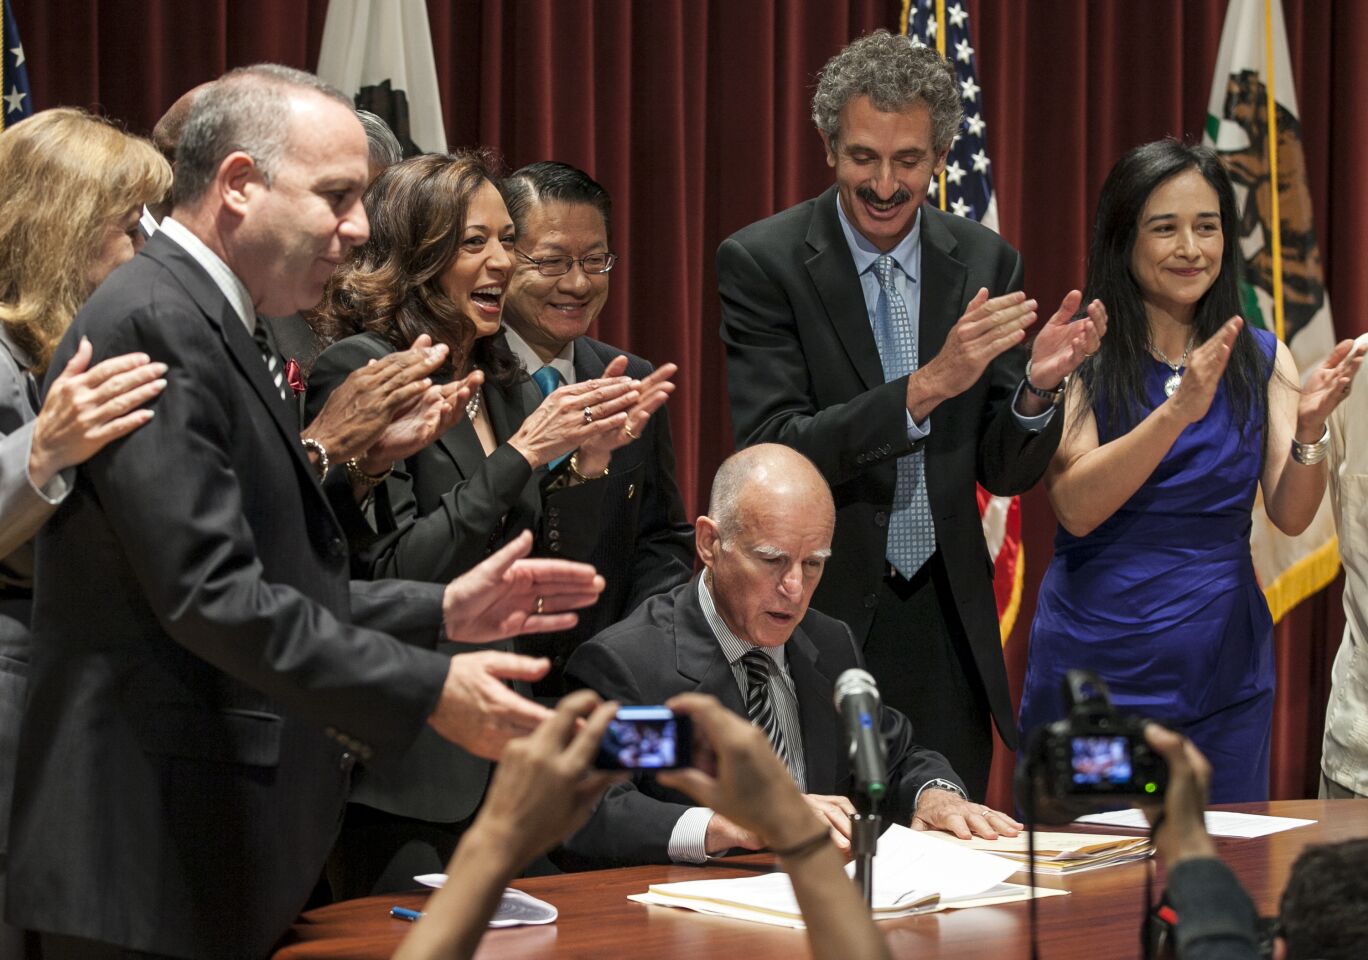 July 11, 2012: Calif. Gov. Jerry Brown is applauded by state Atty. Gen. Kamala Harris and other officials.